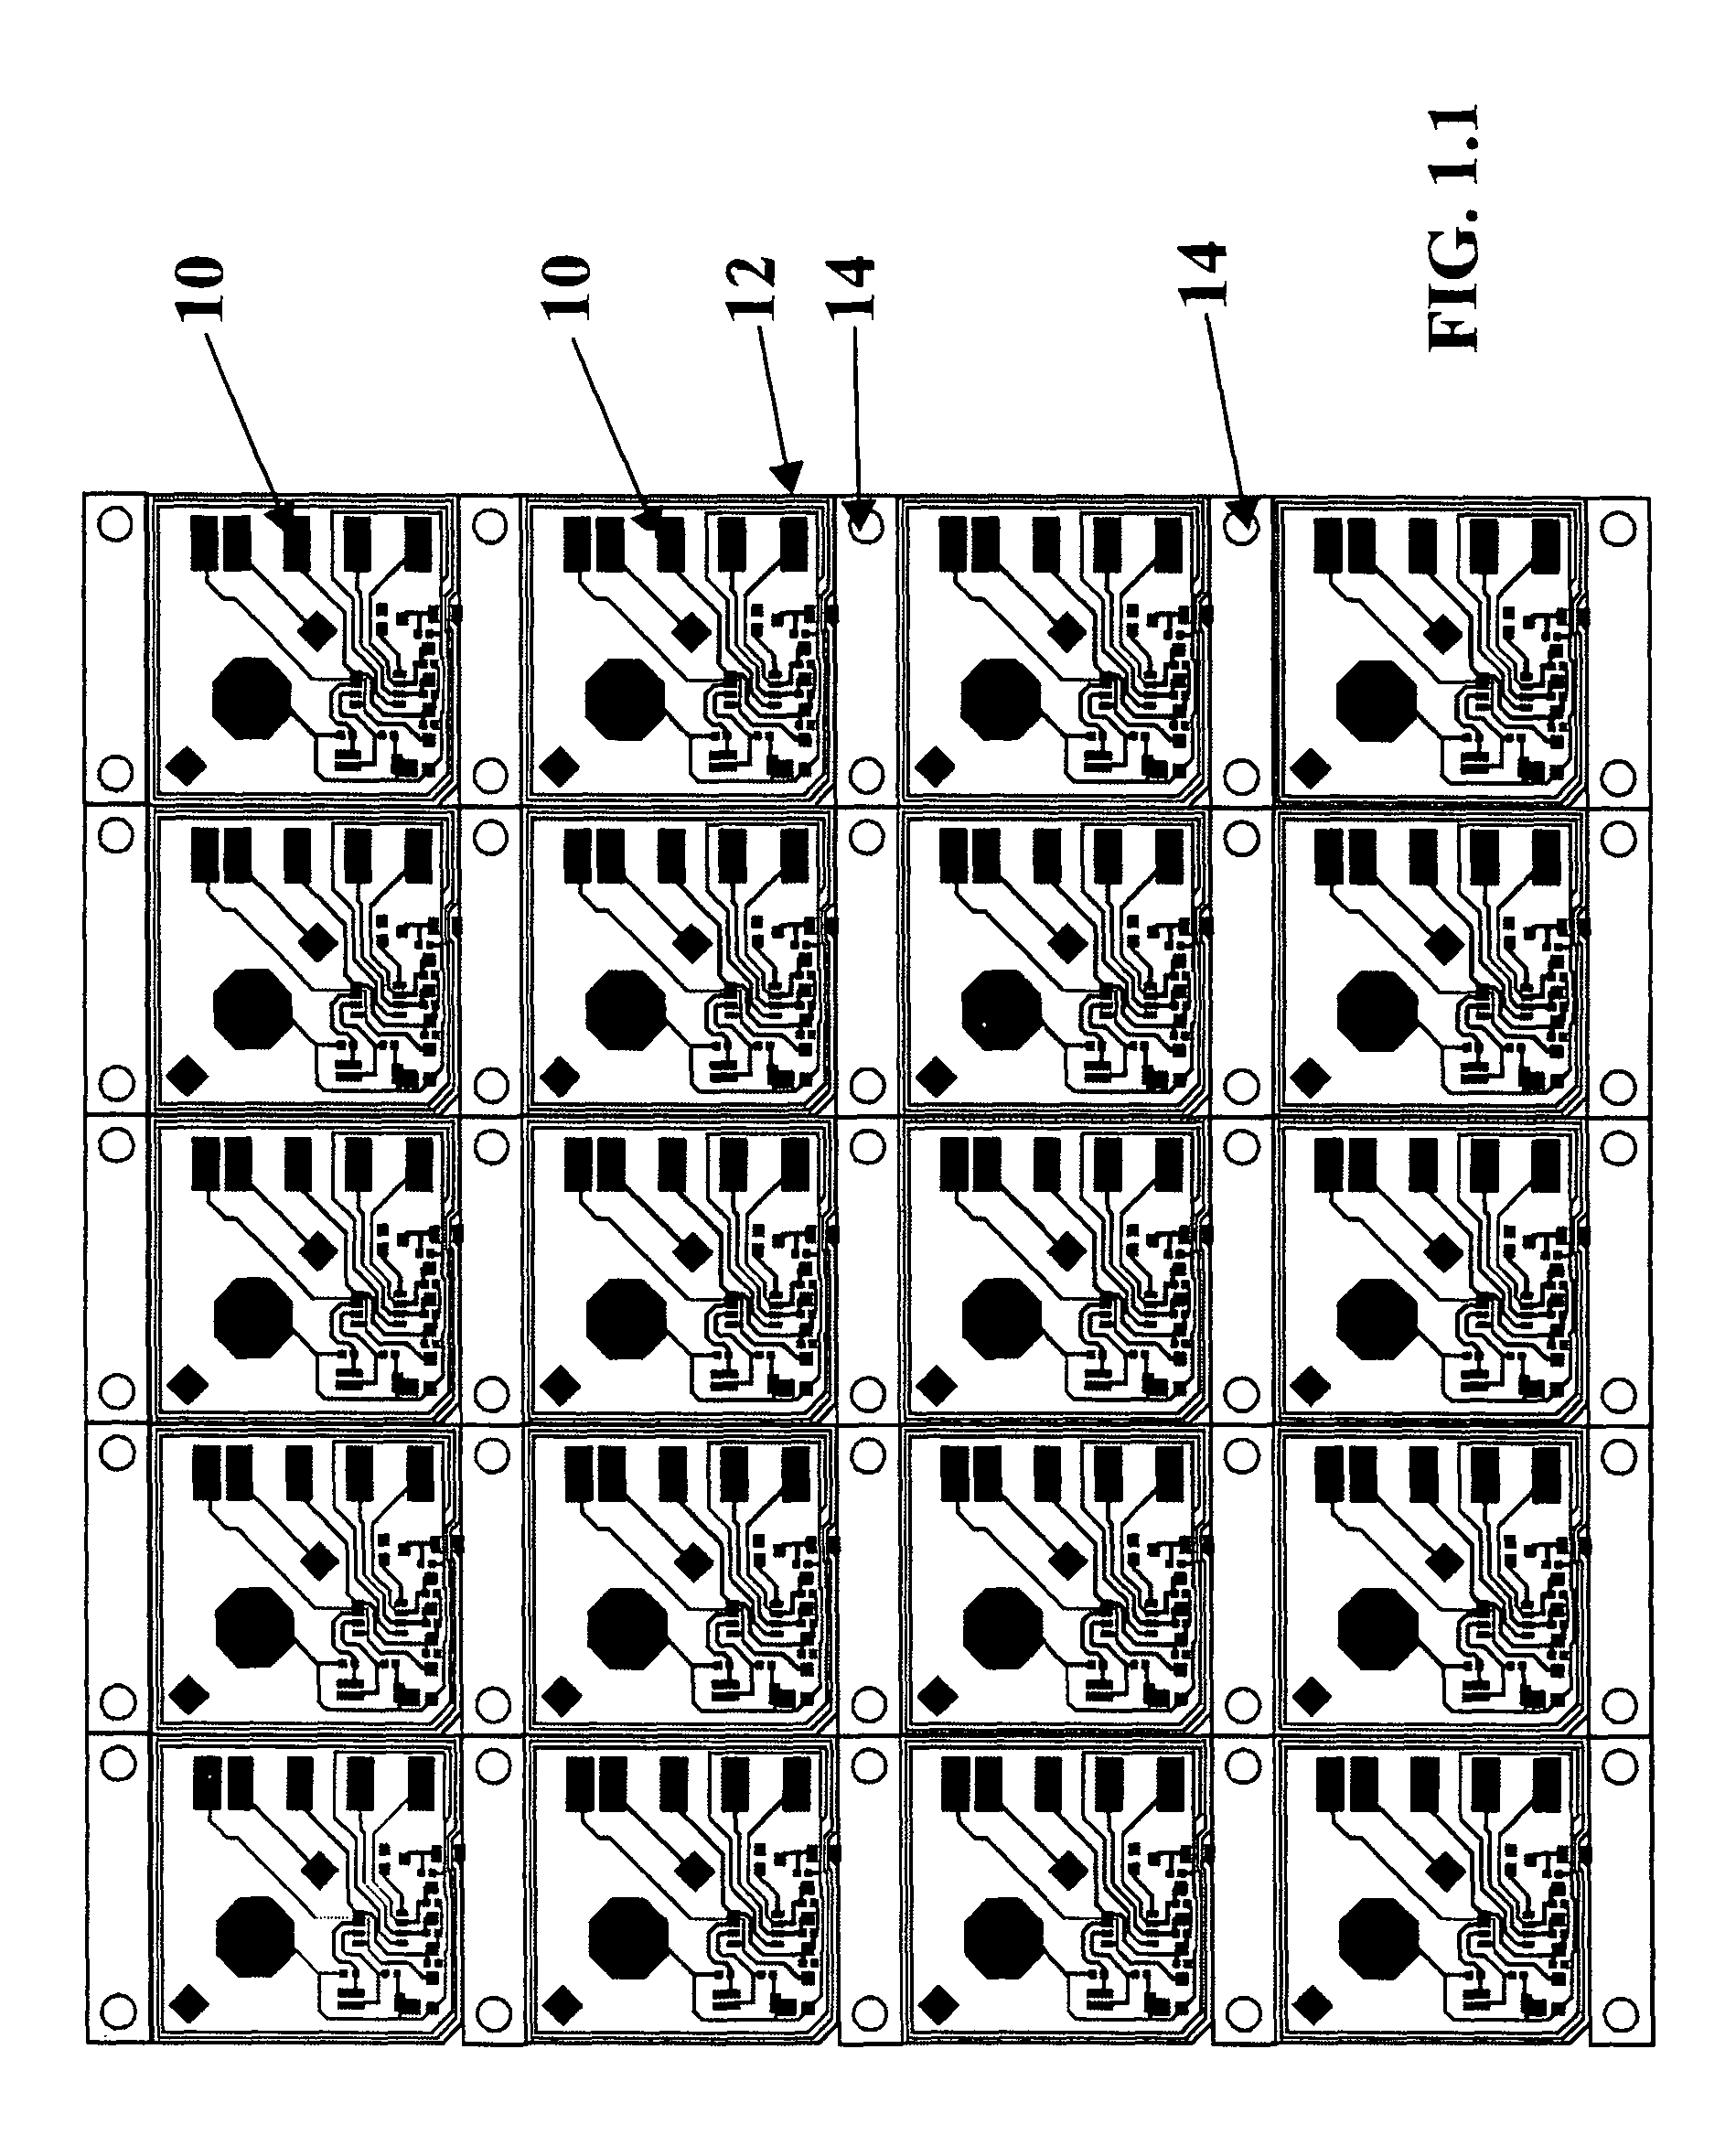 Method for manufacturing a conductive grid for attachment to a blister package